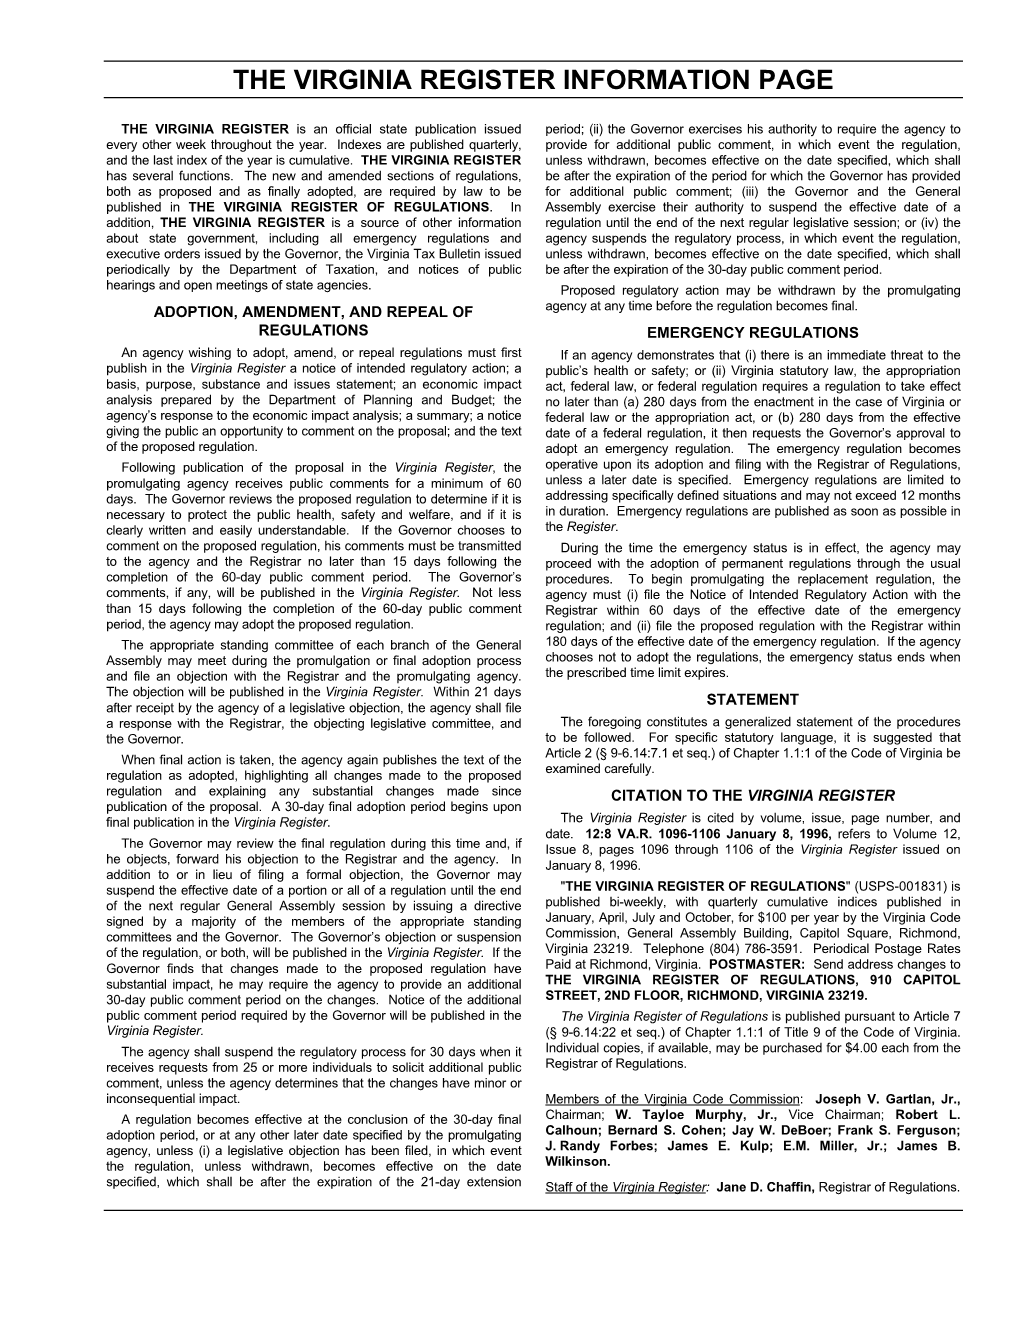 Volume 15, Issue 21 Monday, July 5, 1999